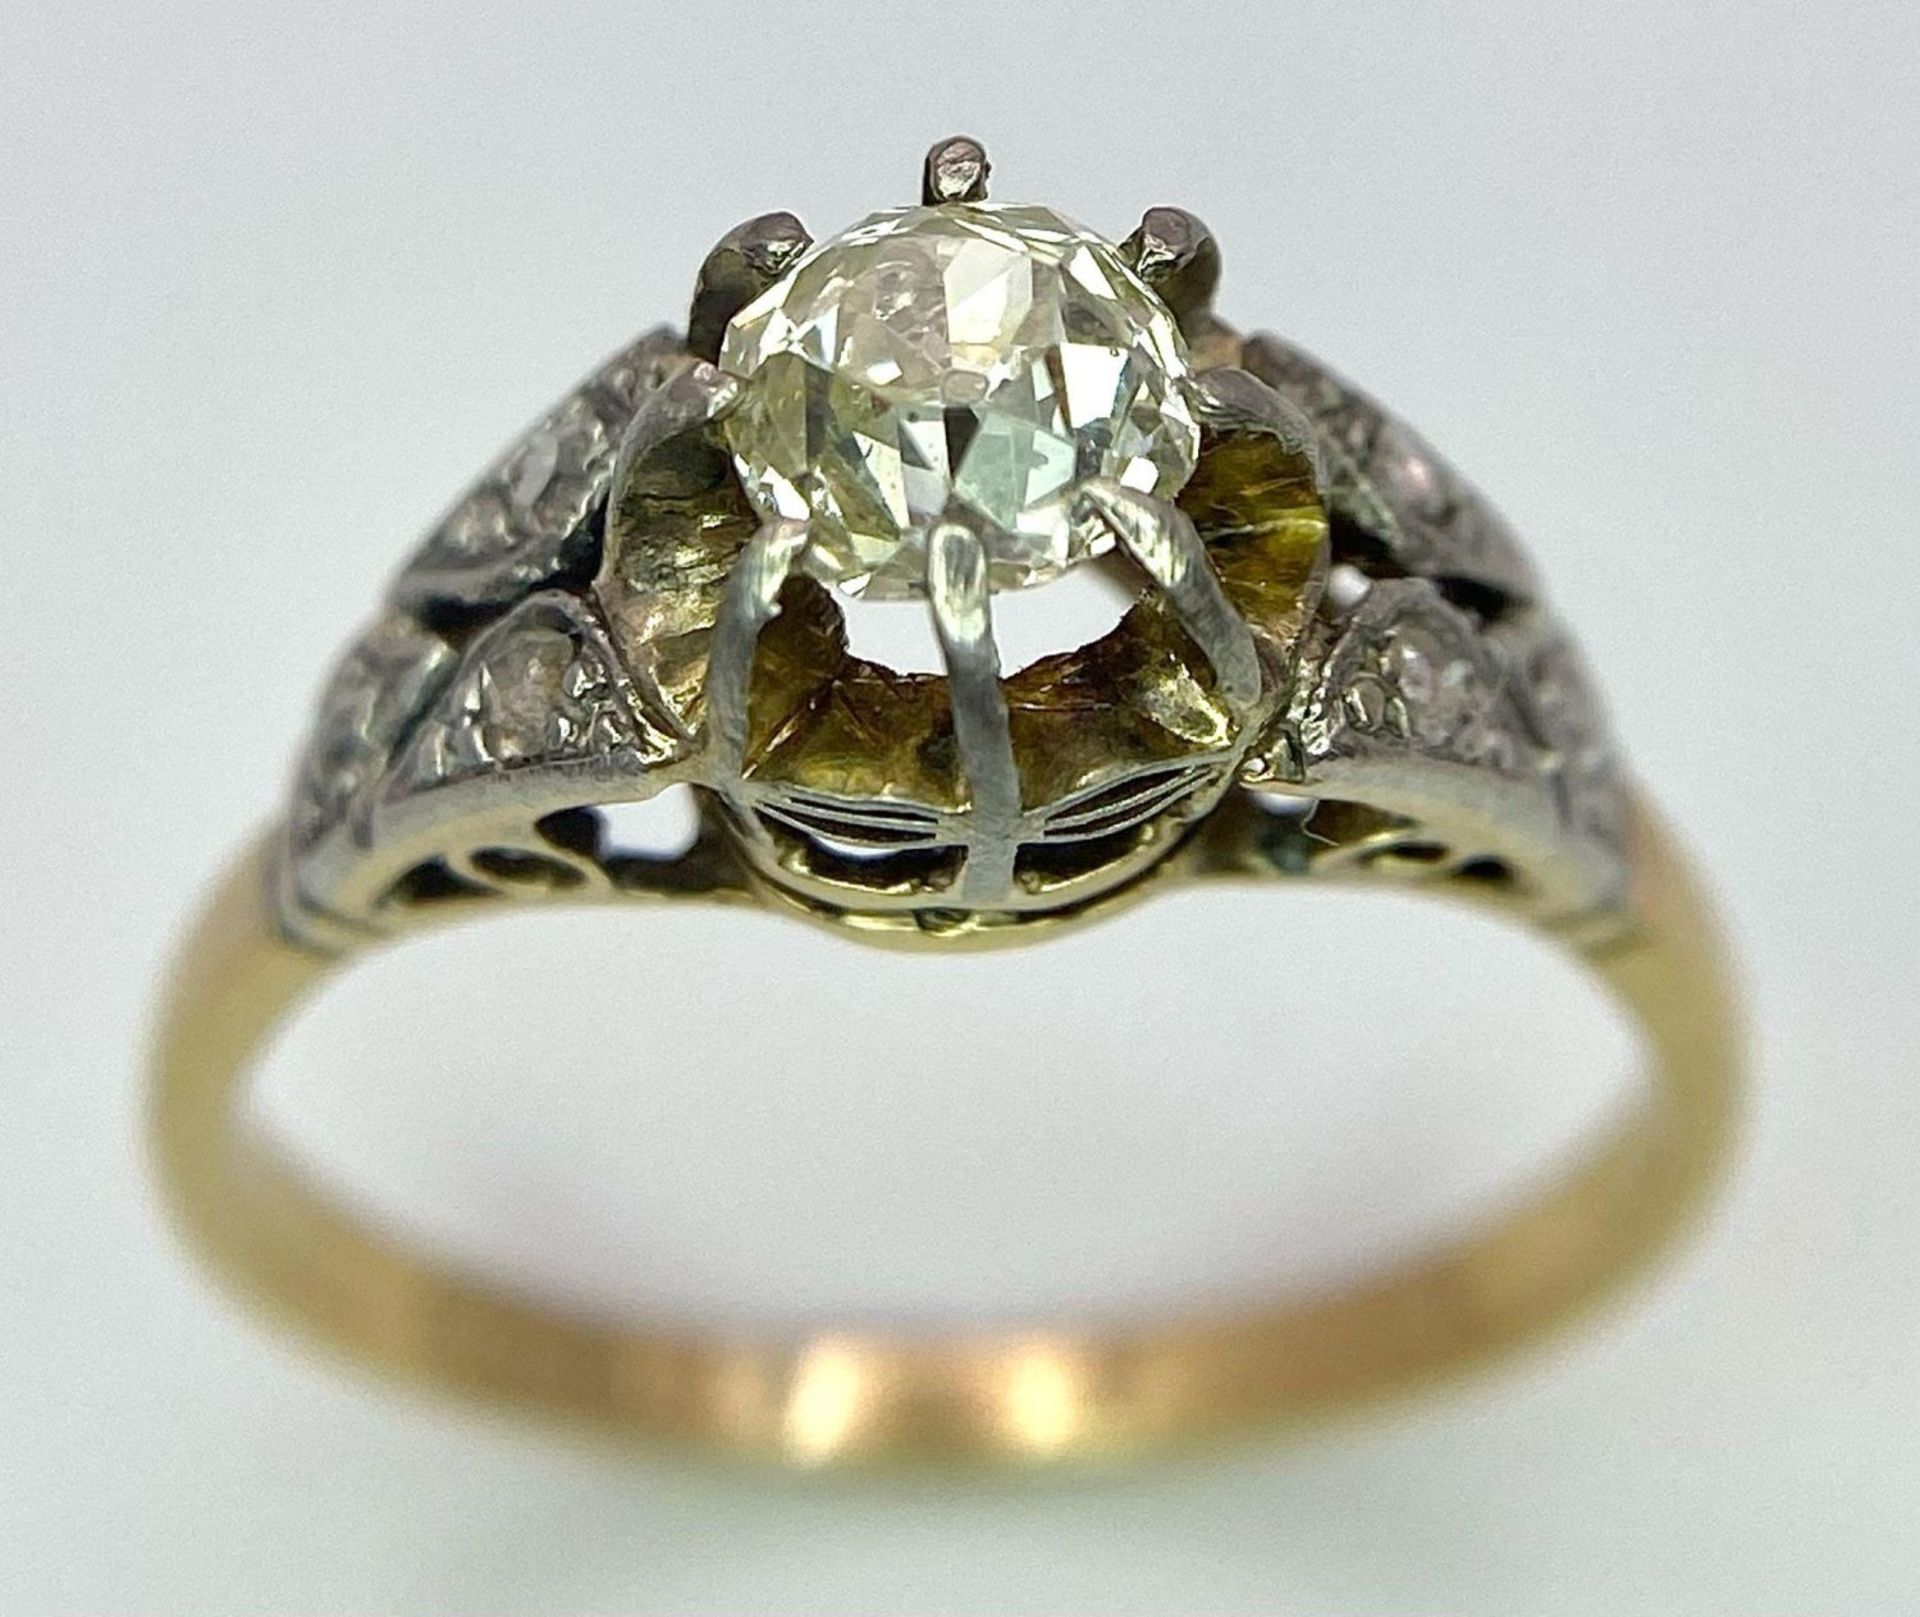 An Antique 18K Gold, Platinum and Diamond Ring. Central 0.75ct central stone with diamond accents on - Image 2 of 7